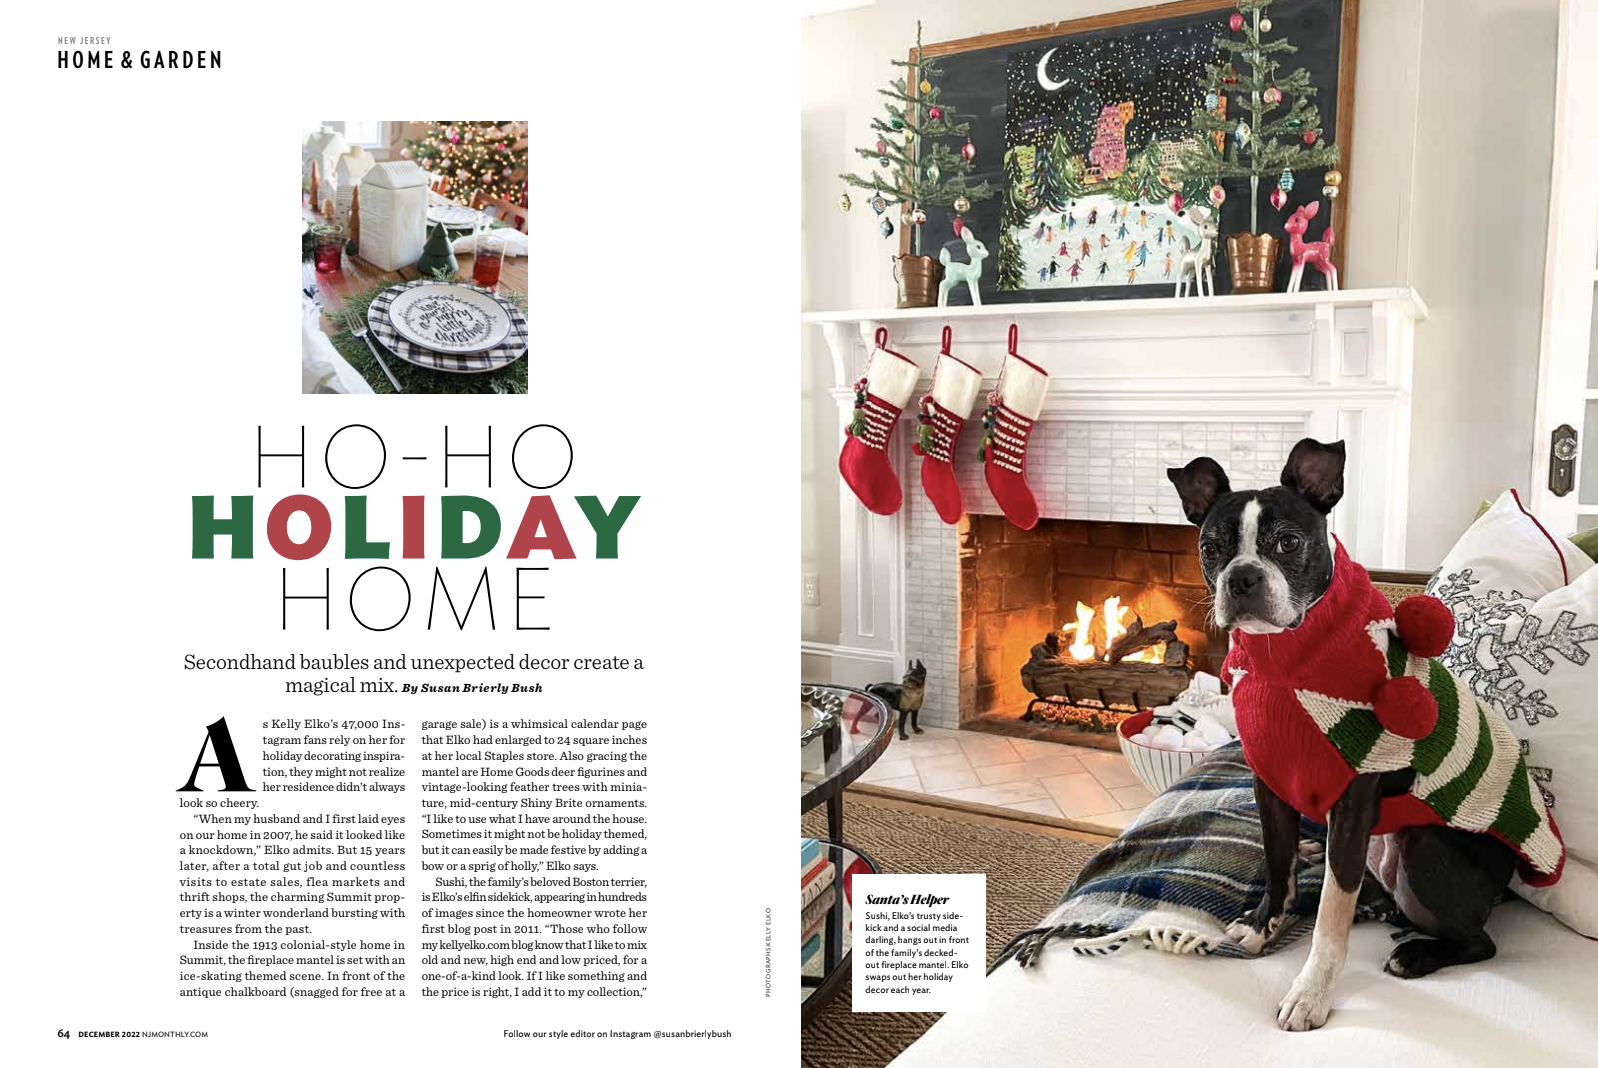 NJ Monthly Magazine Kelly Elko Christmas home feature! Love the dog in her Christmas sweater and the colorful mantel kellyelko.com